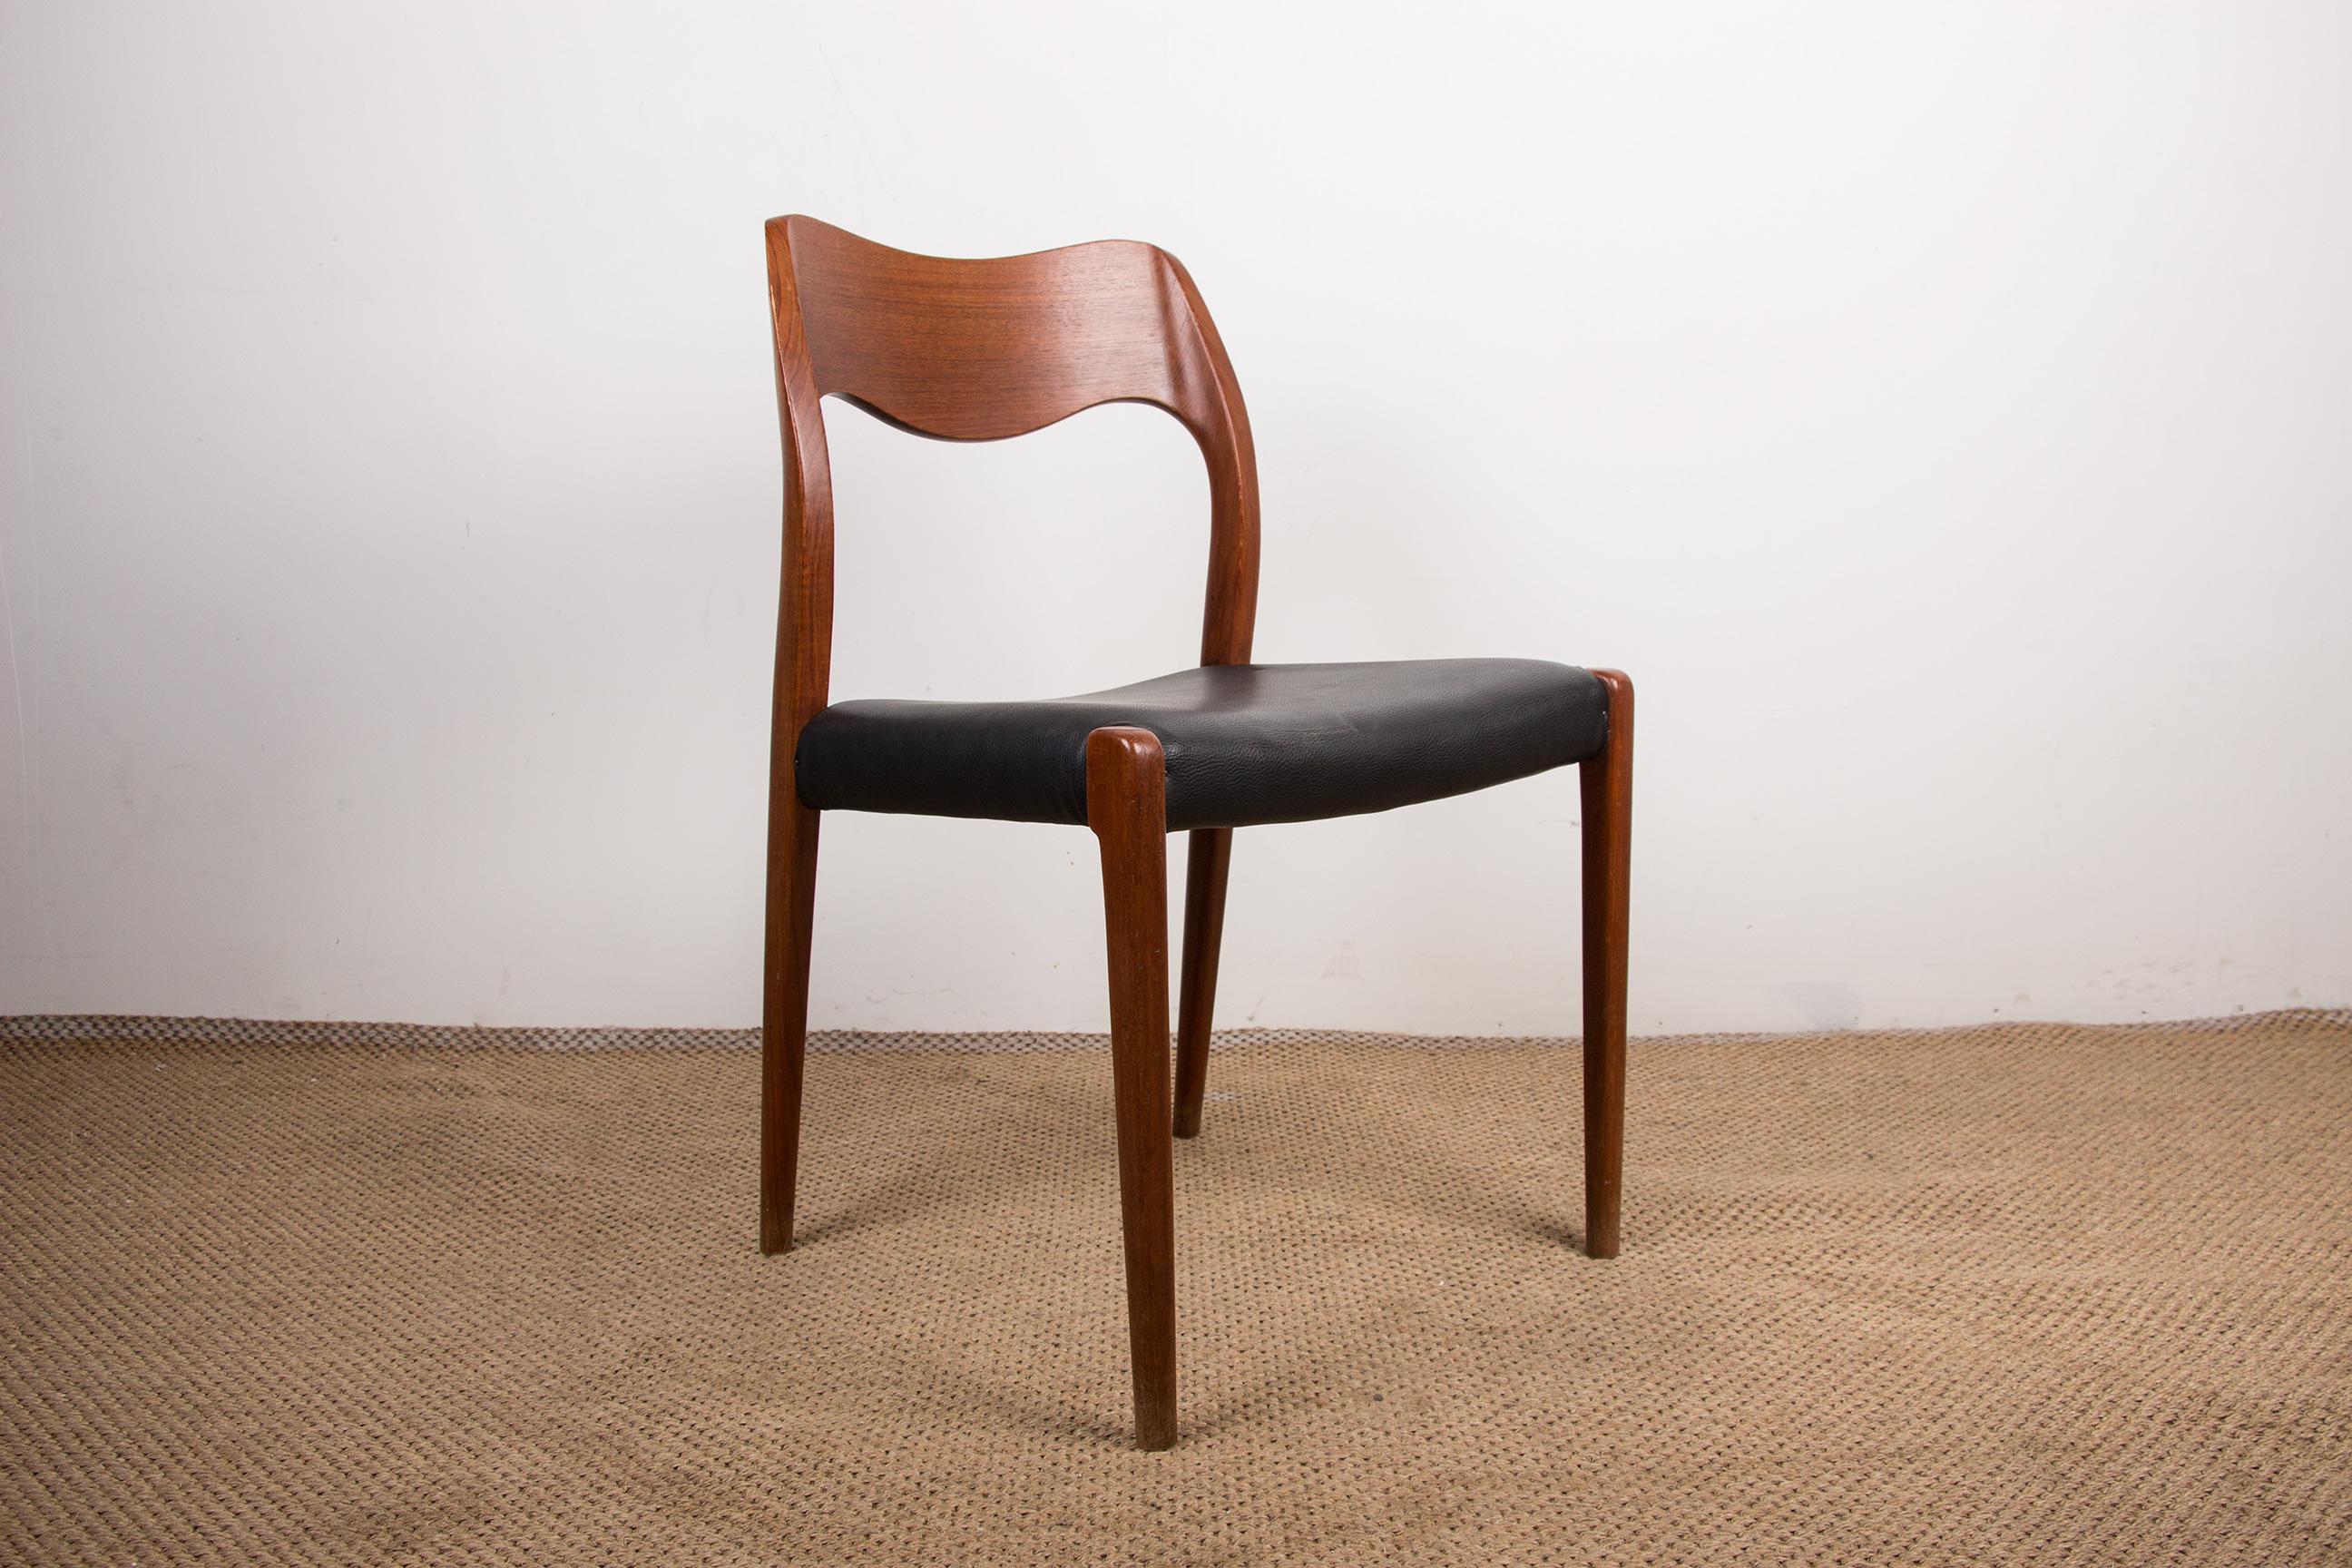 Series of 6 dining room chairs with particularly comfortable seats. Chairs with a very elegant and sober design, renowned model Niels Otto Moller the 71 is an almost iconic piece of furniture. Furniture designed in 1951 and listed in the Design